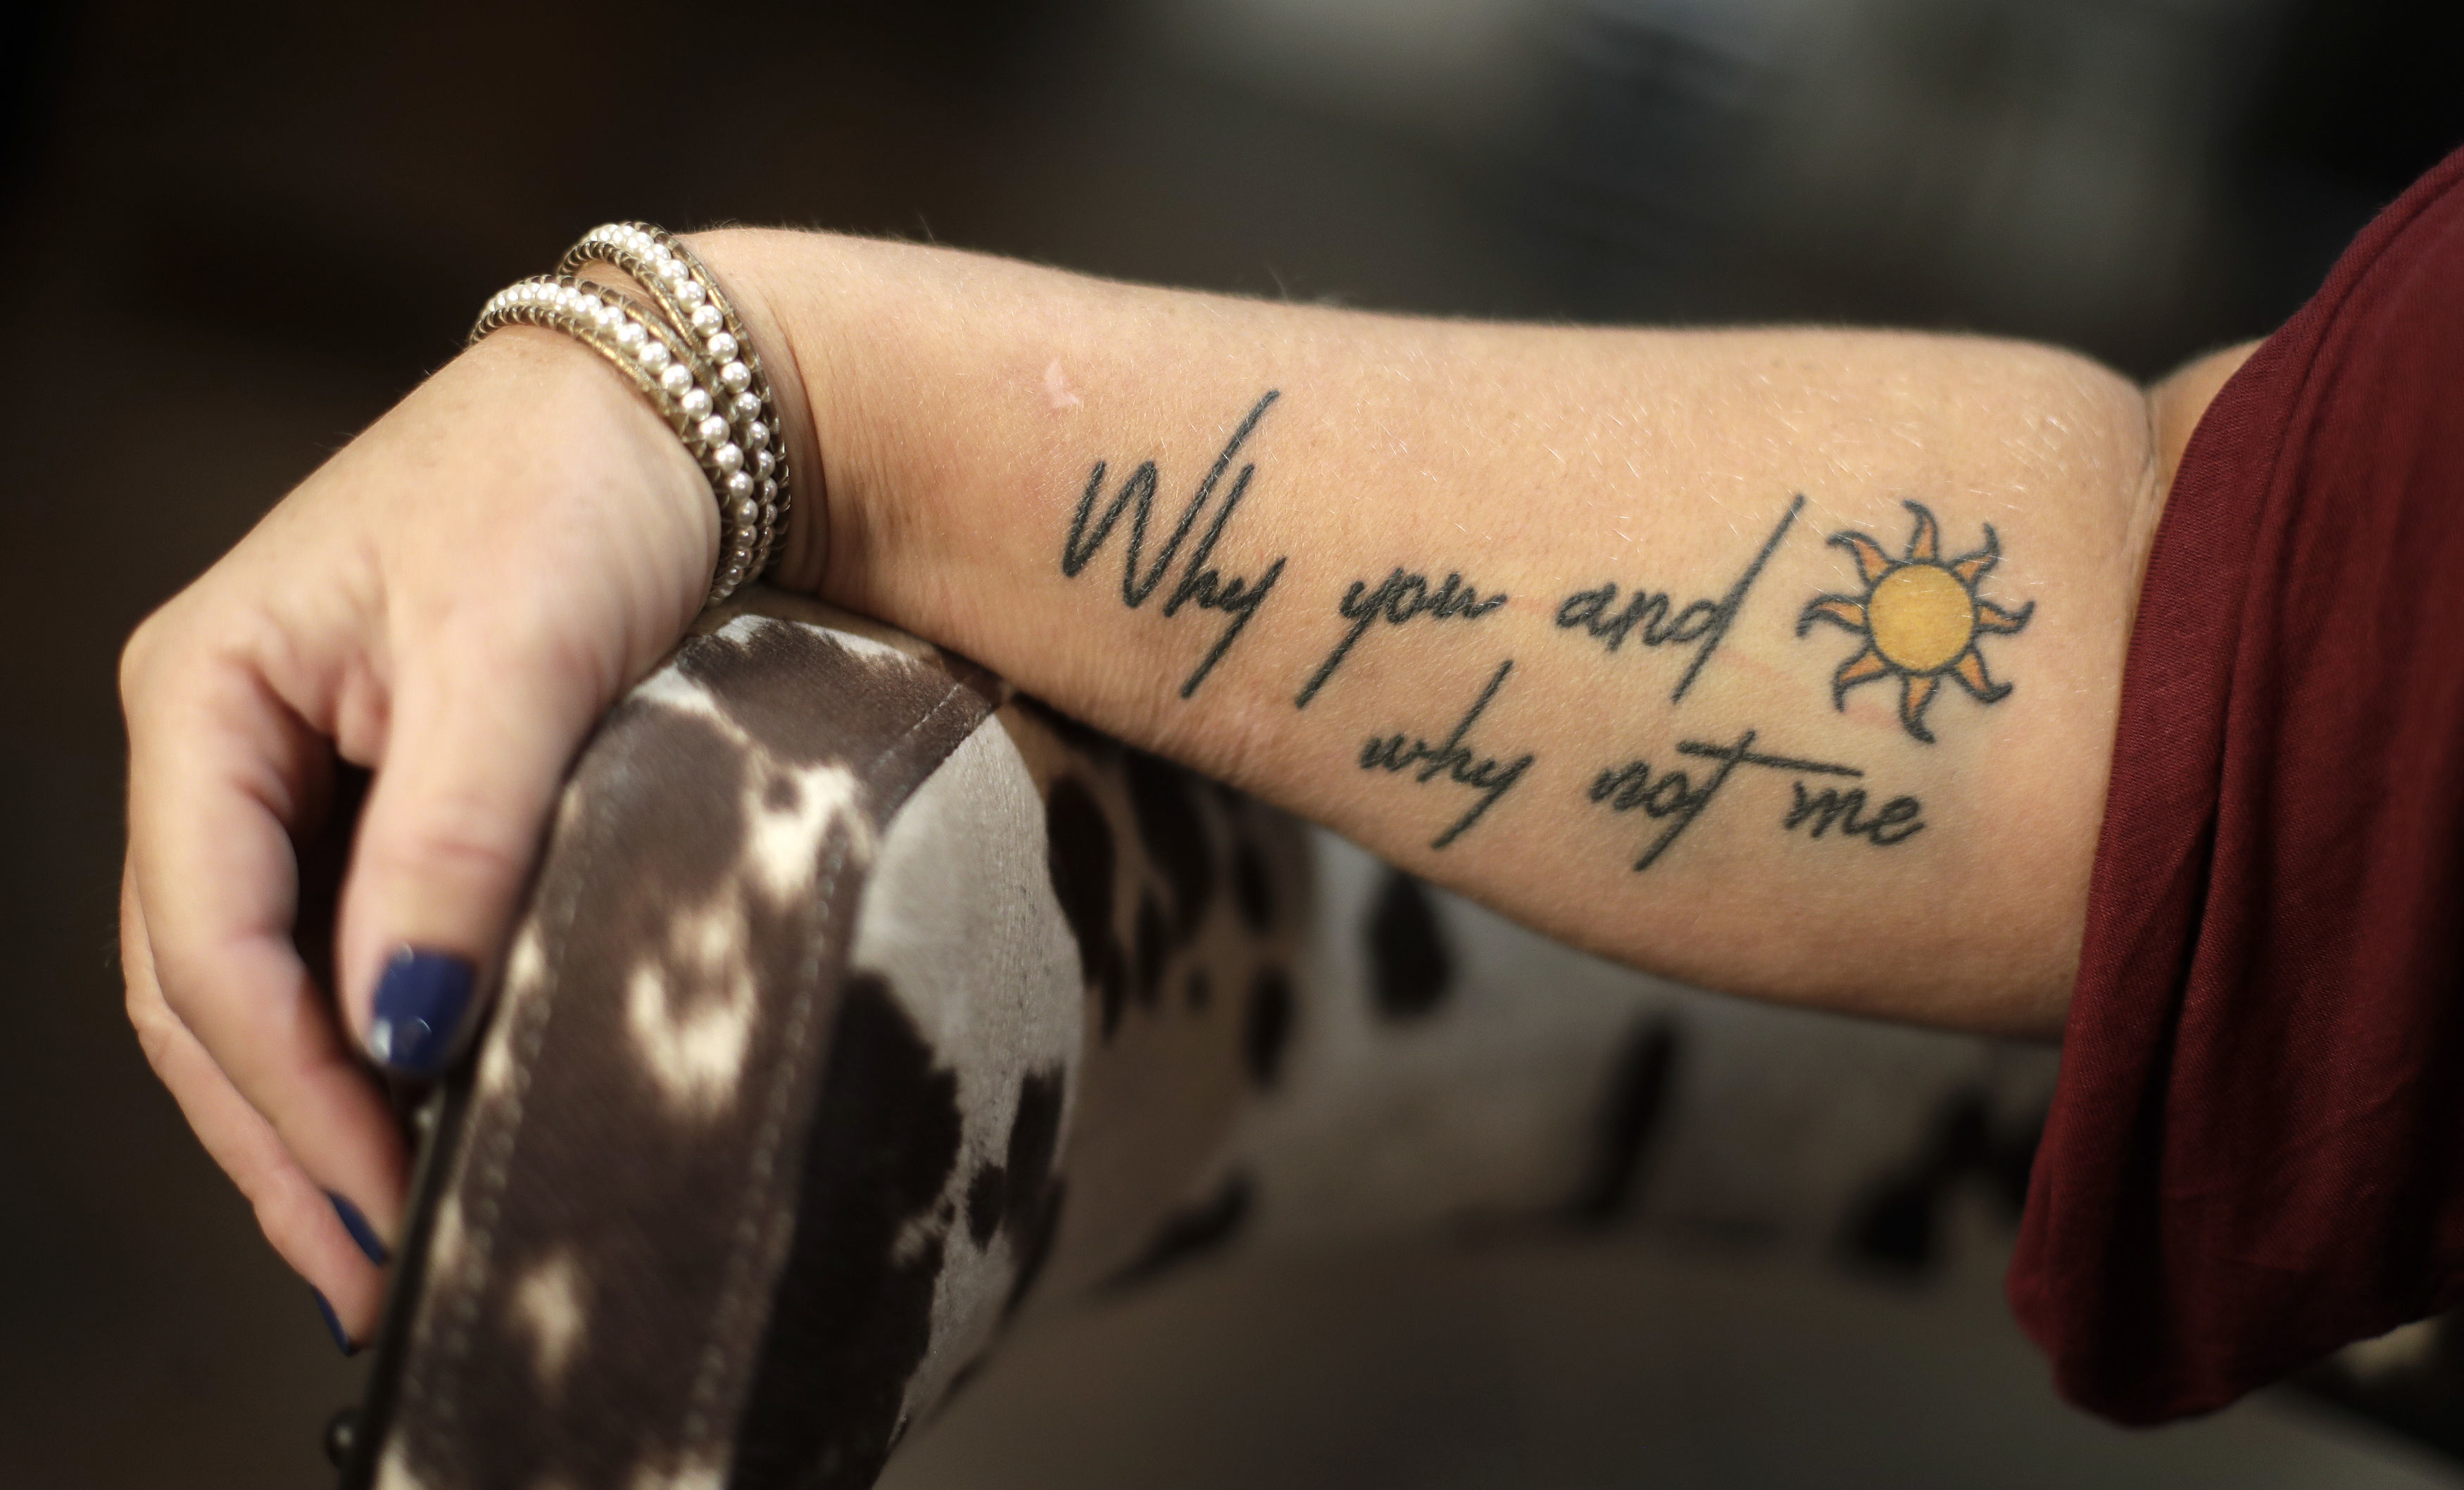 A tattoo bearing a lyric by country singer Eric Church